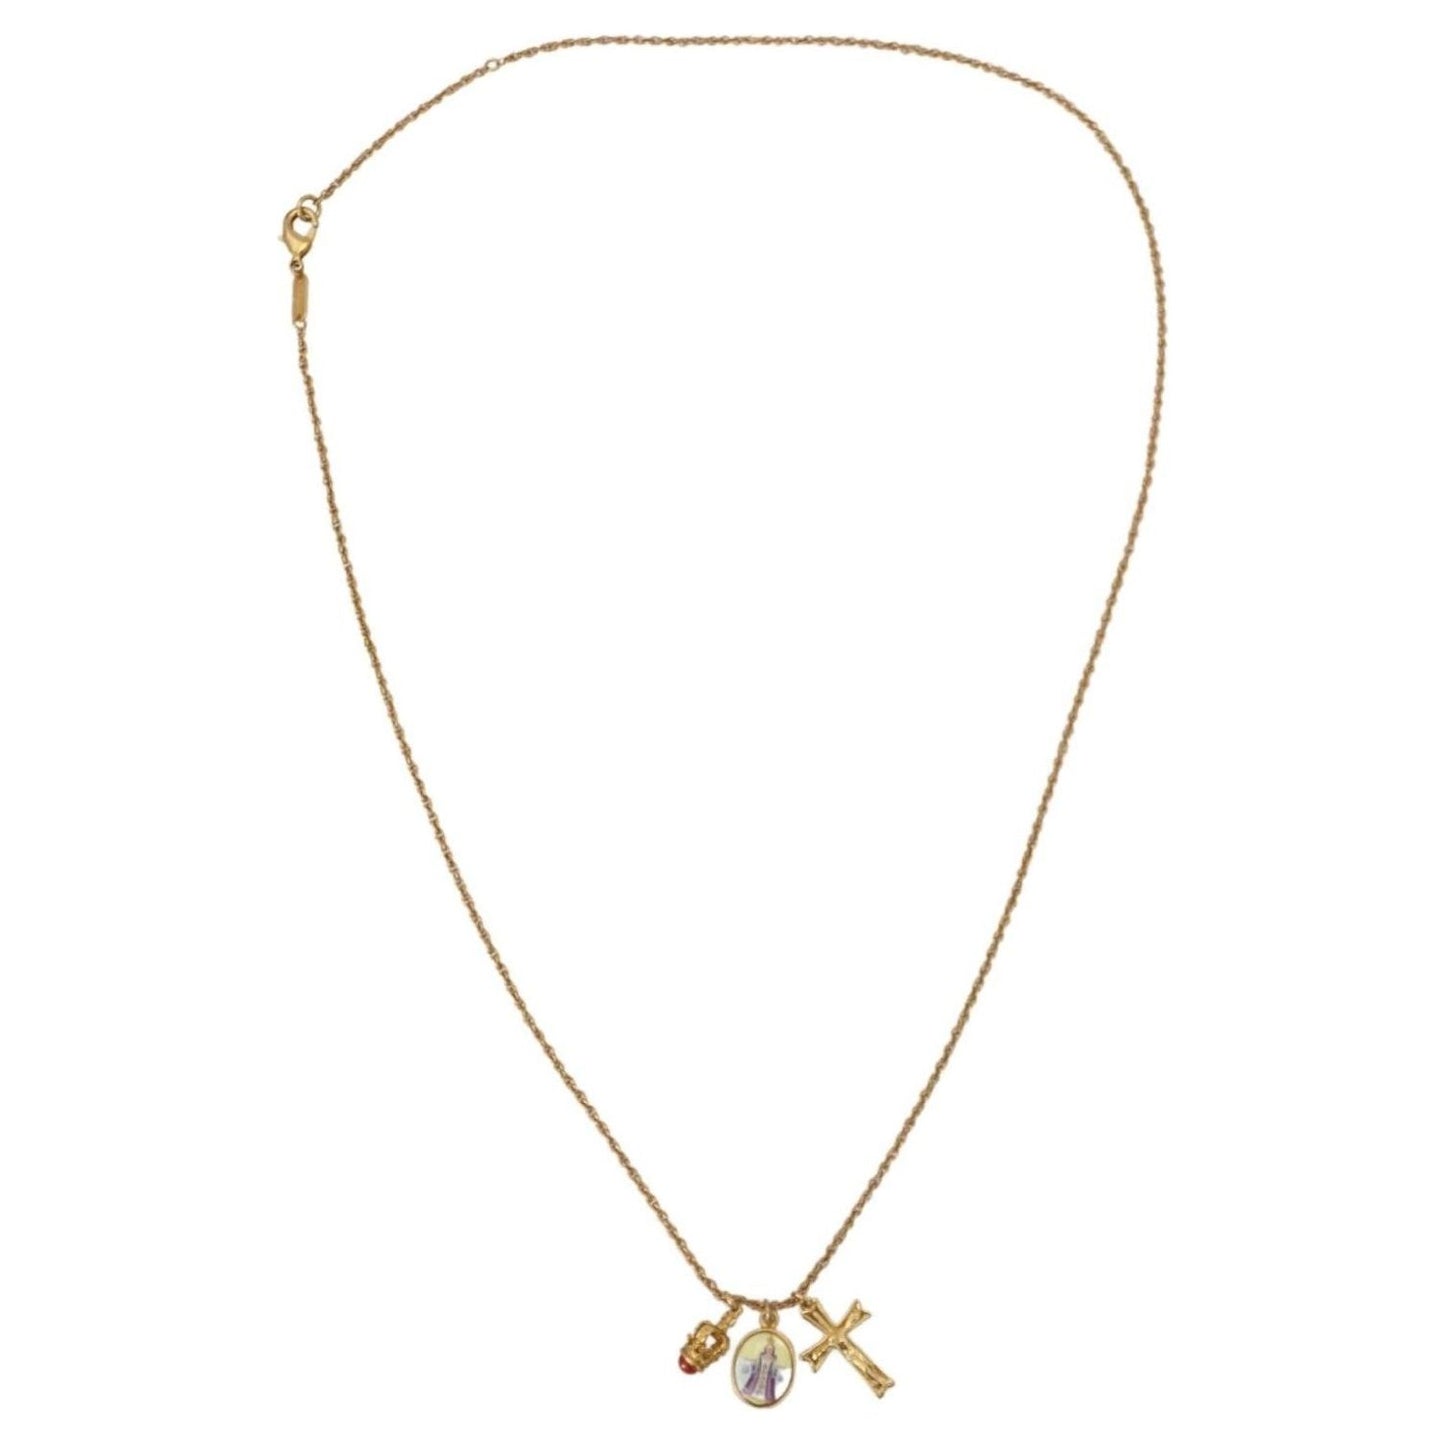 Dolce & Gabbana Elegant Gold Tone Charm Necklace with Cross Pendant gold-brass-chain-religious-cross-pendant-charm-necklace WOMAN NECKLACE IMG_4228-b5f61167-366.jpg